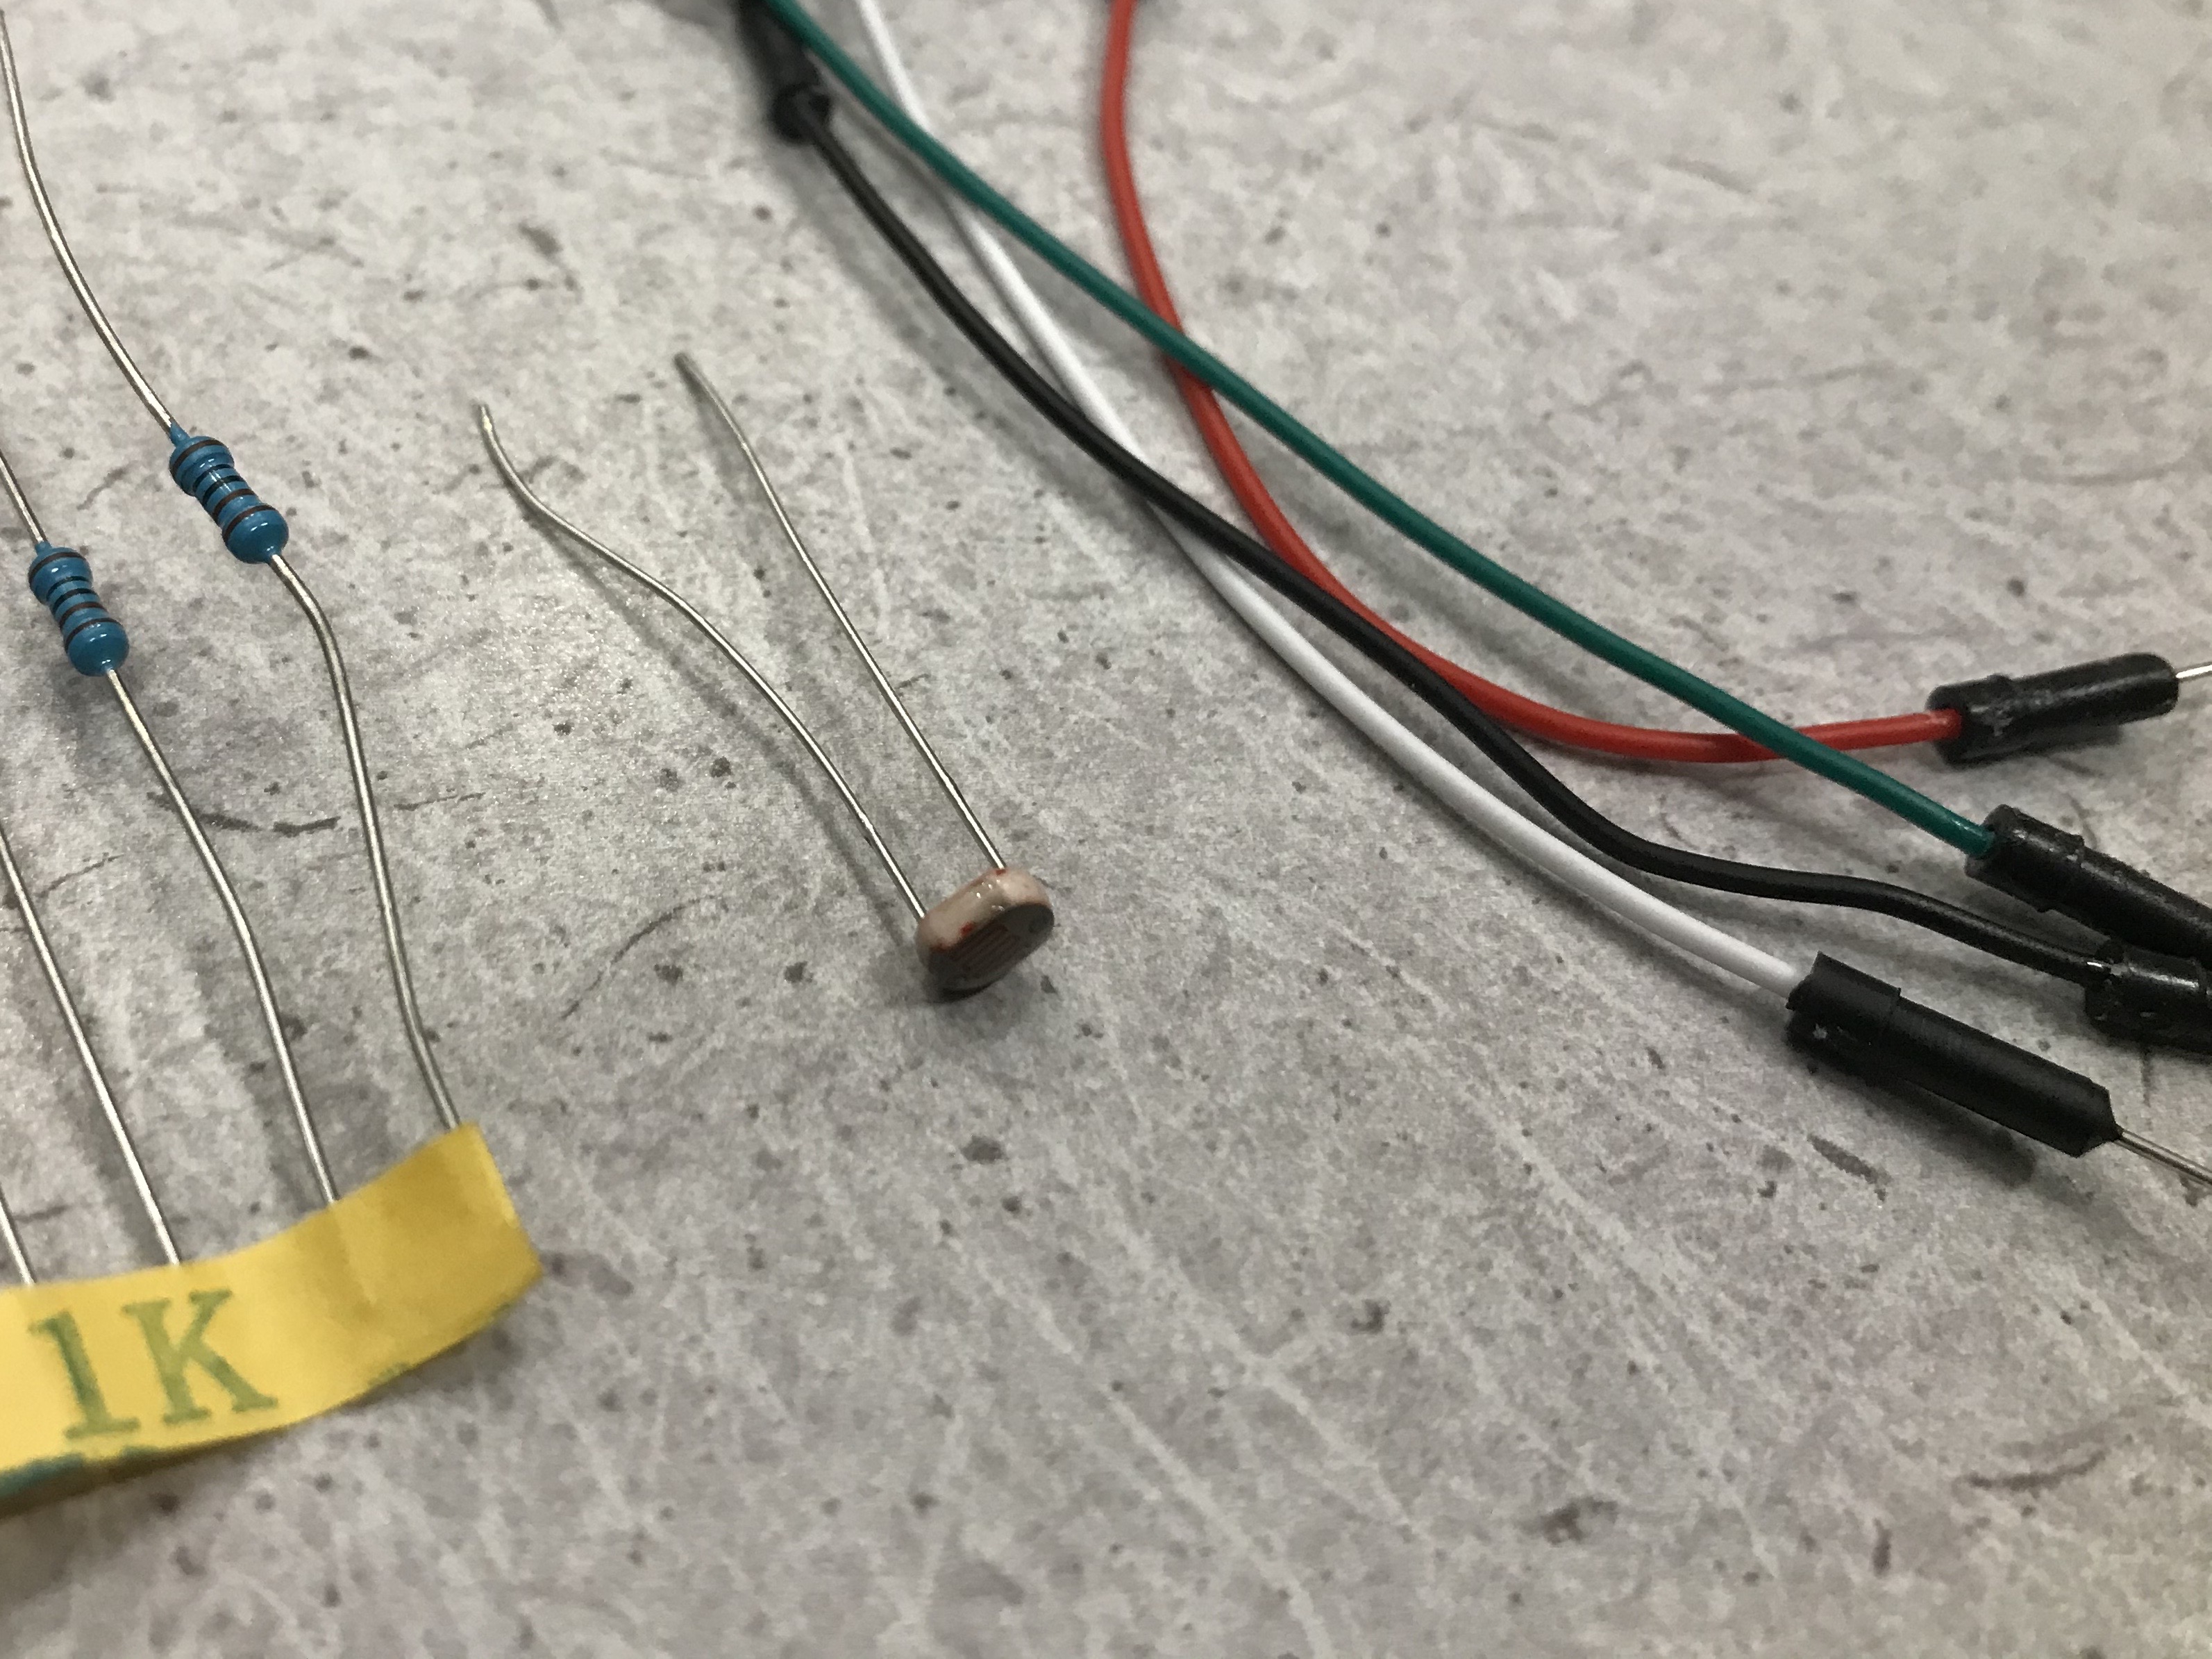 All parts necessary for the voltage divider